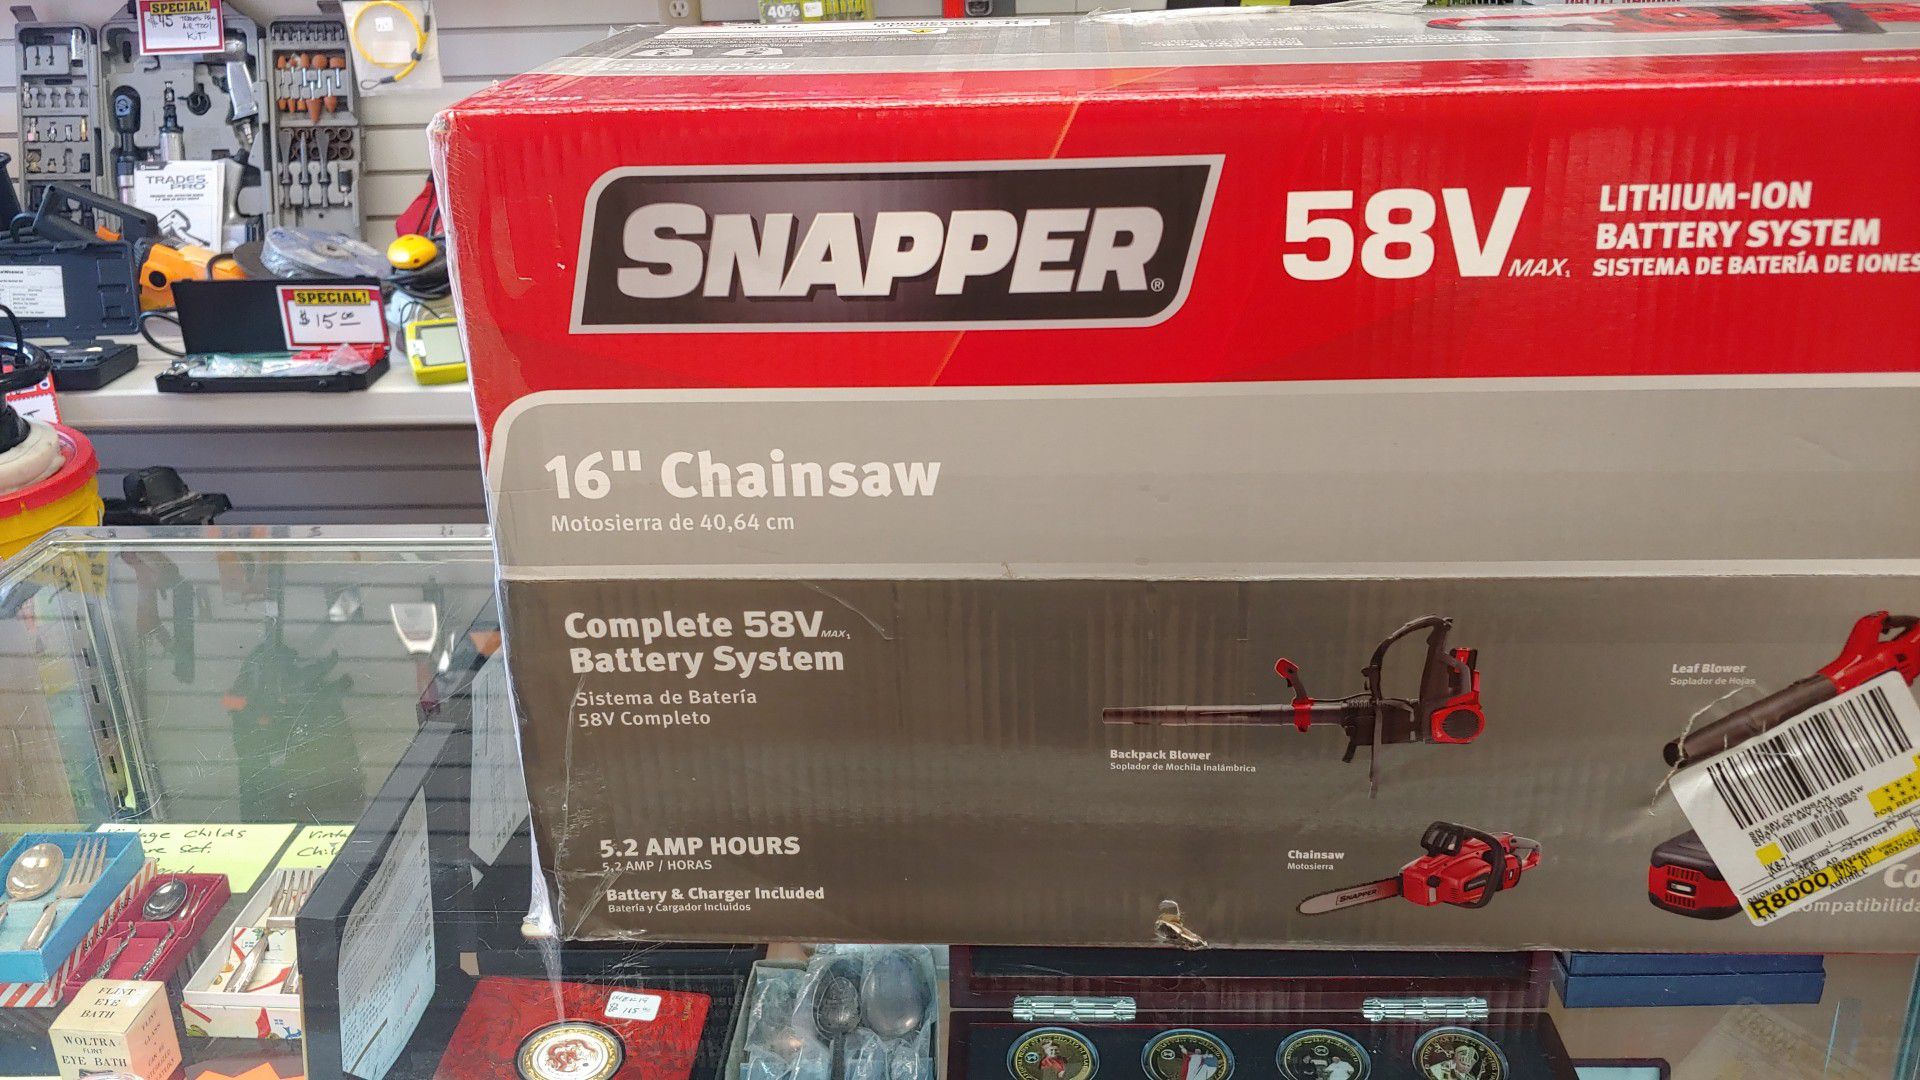 Snapper 58v lithium 16" chainsaw. New in box!